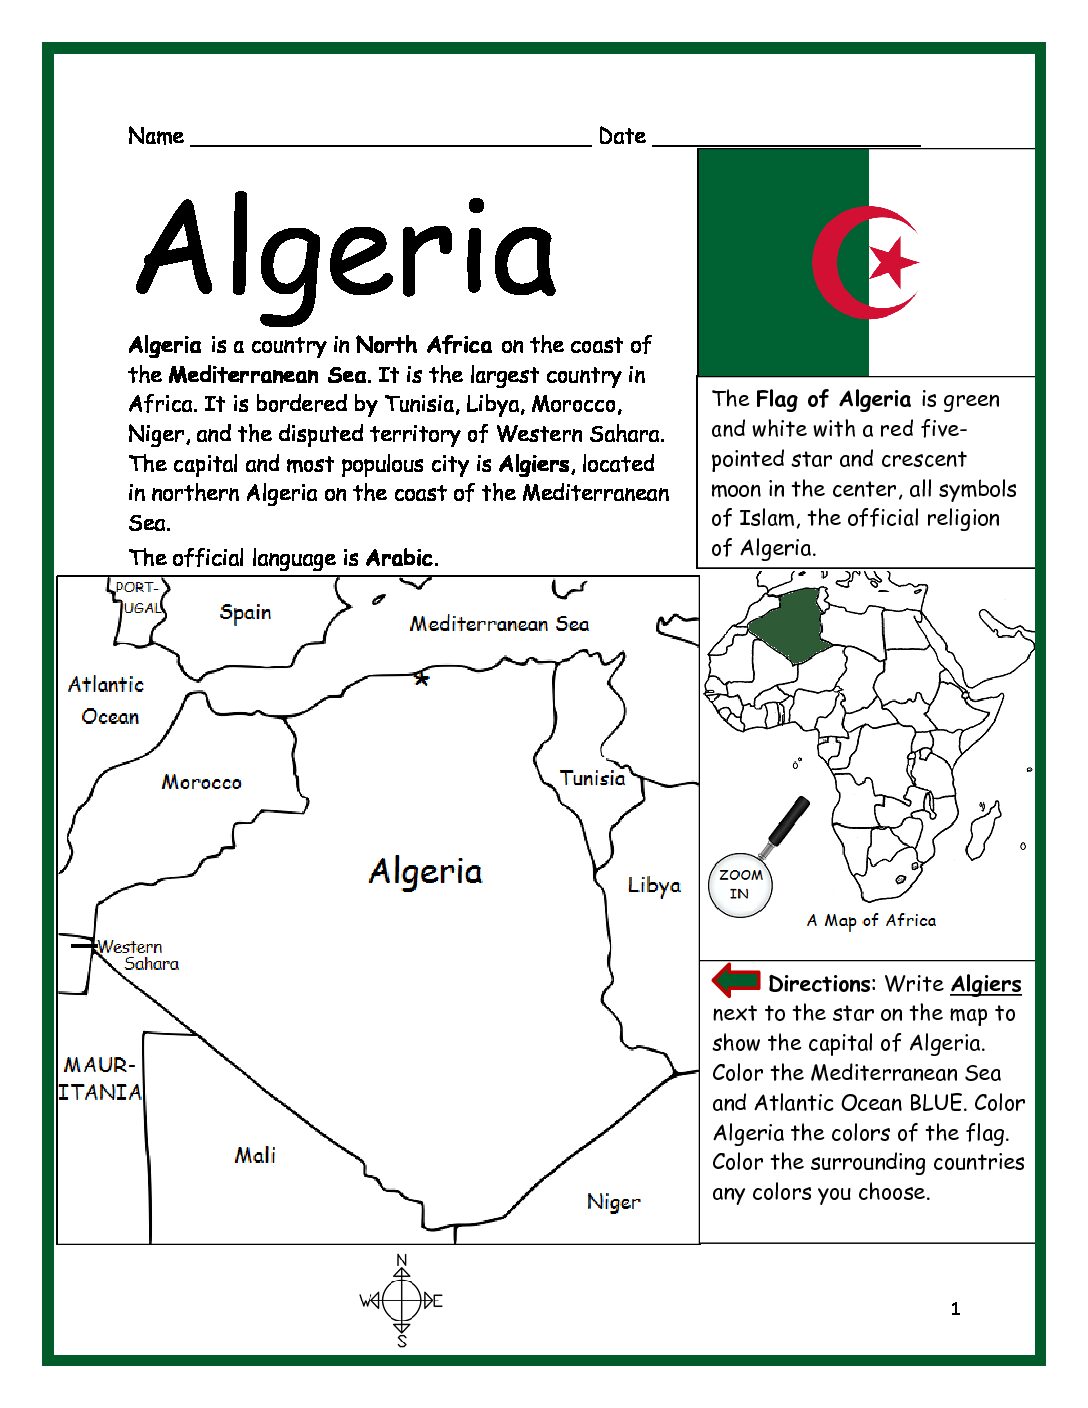 Algeria - Introductory Geography Worksheet 